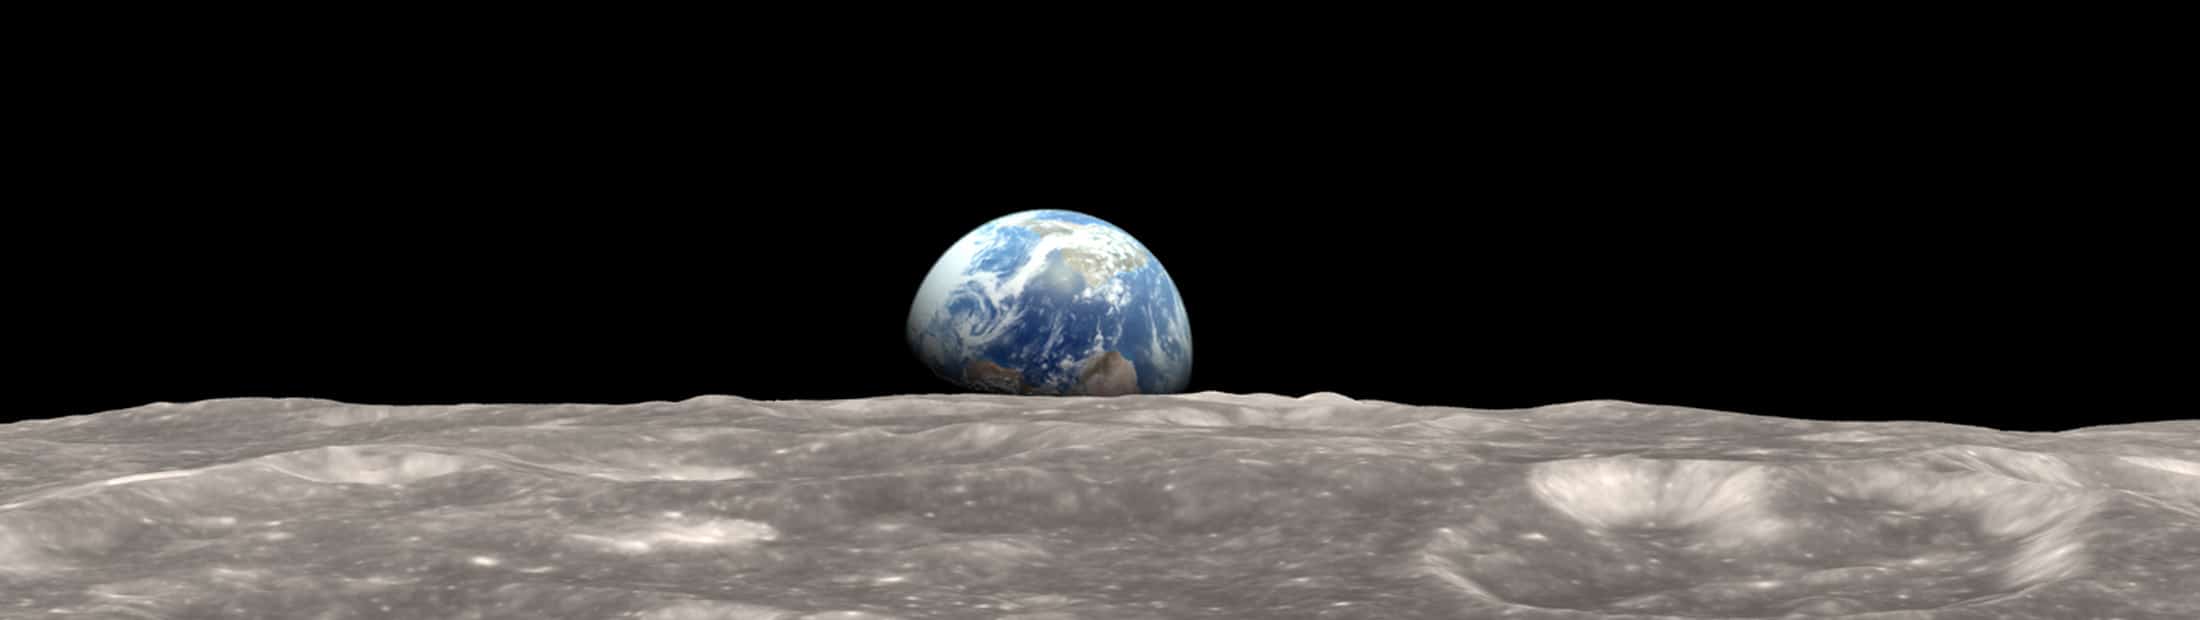 photo of earth taken from the moon